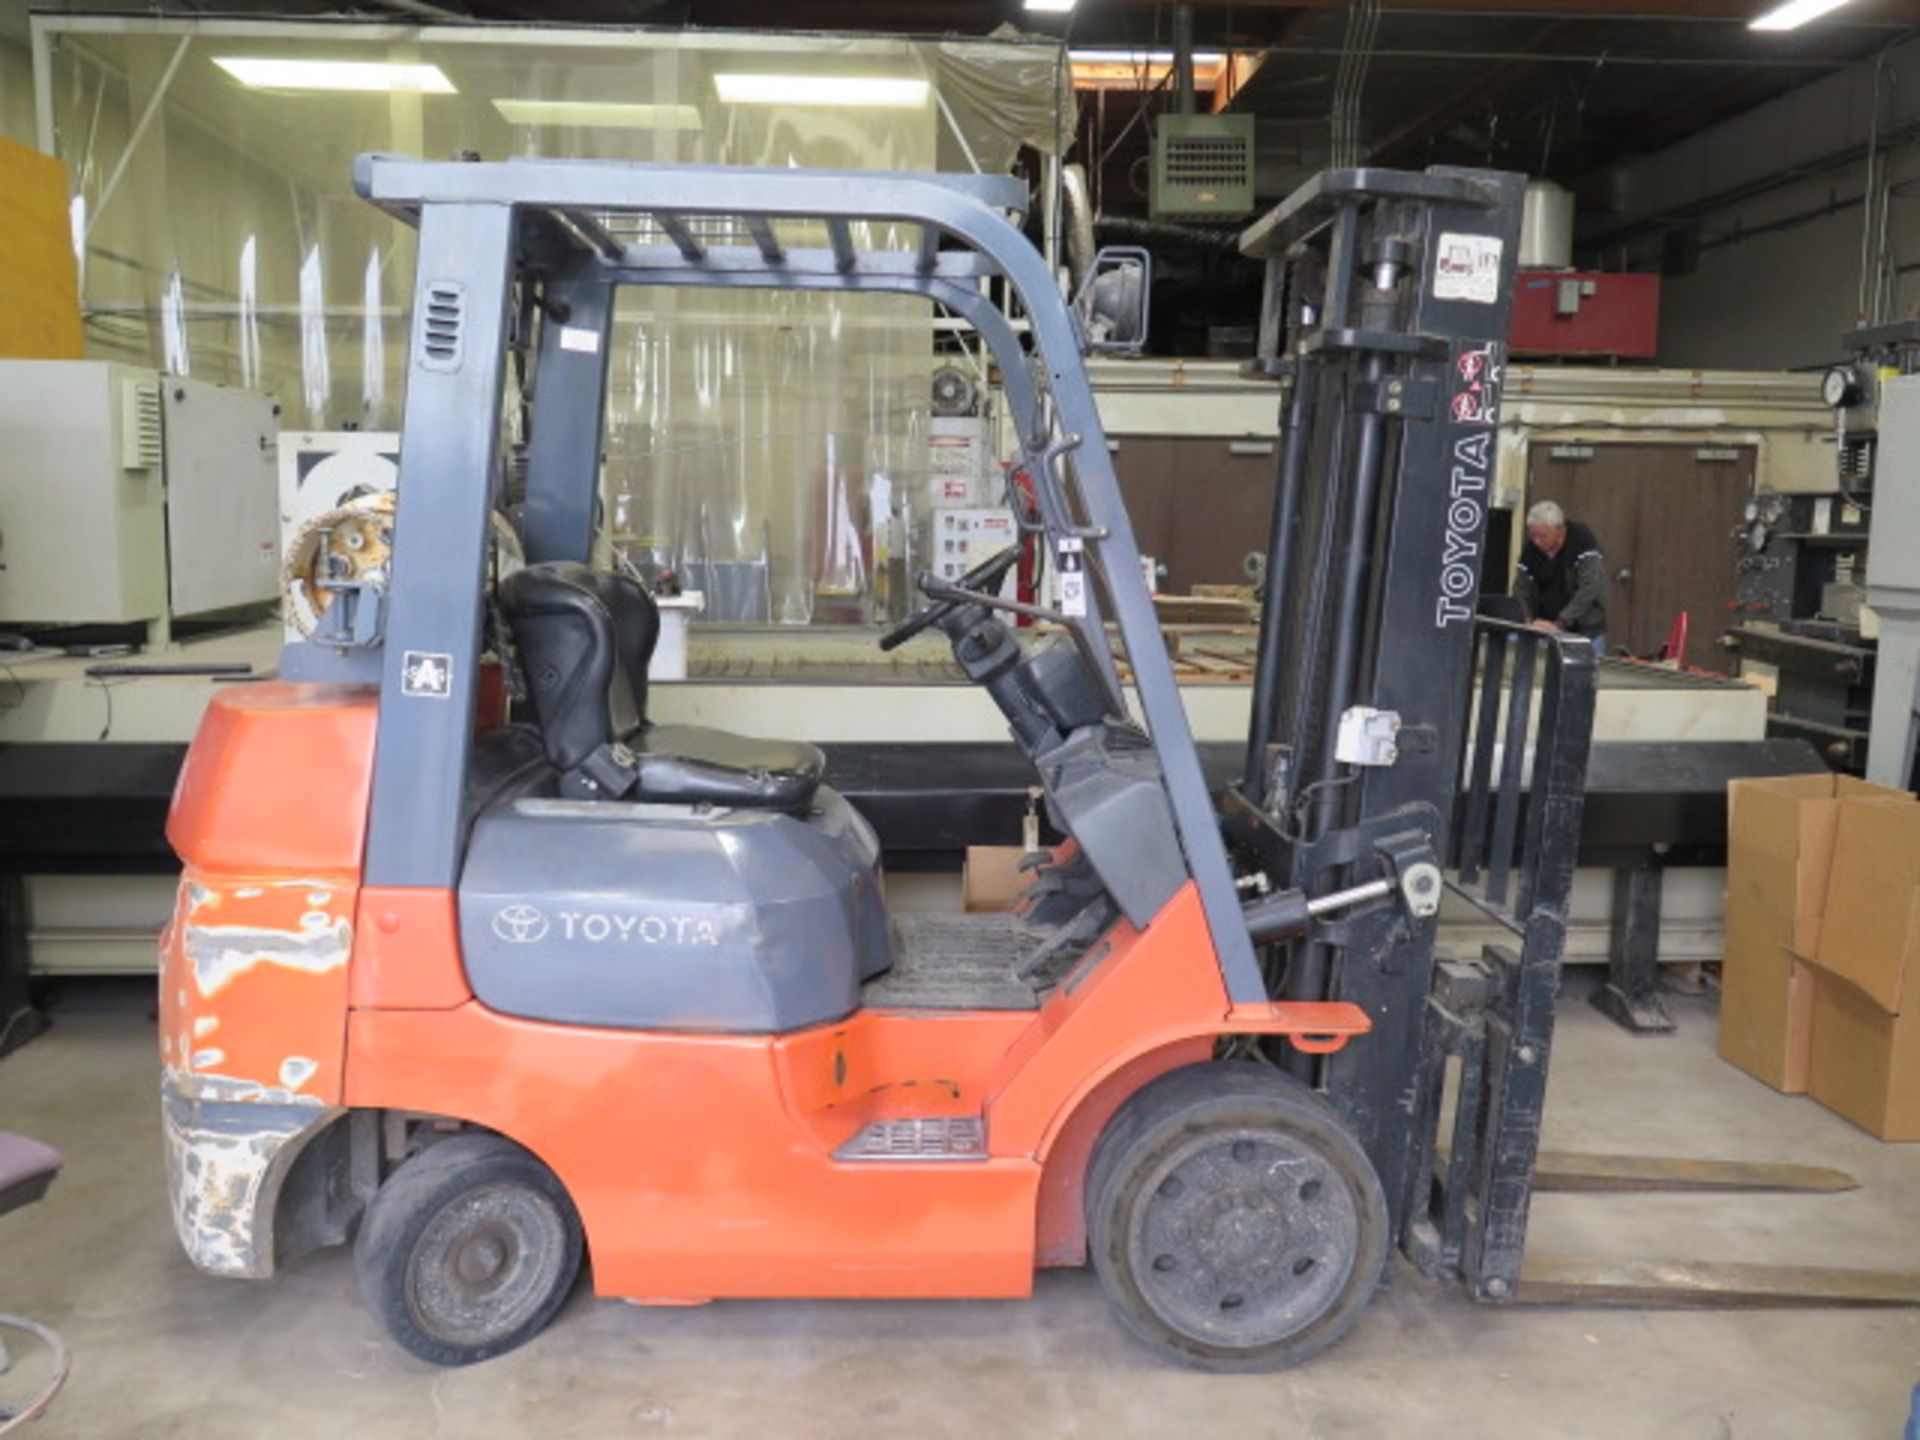 Toyota 7FCGU30 5600 Lb LPG Forklift s/n 63249 w/ 2-Stage, 131” Lift Height, Side Shift, SOLD AS IS